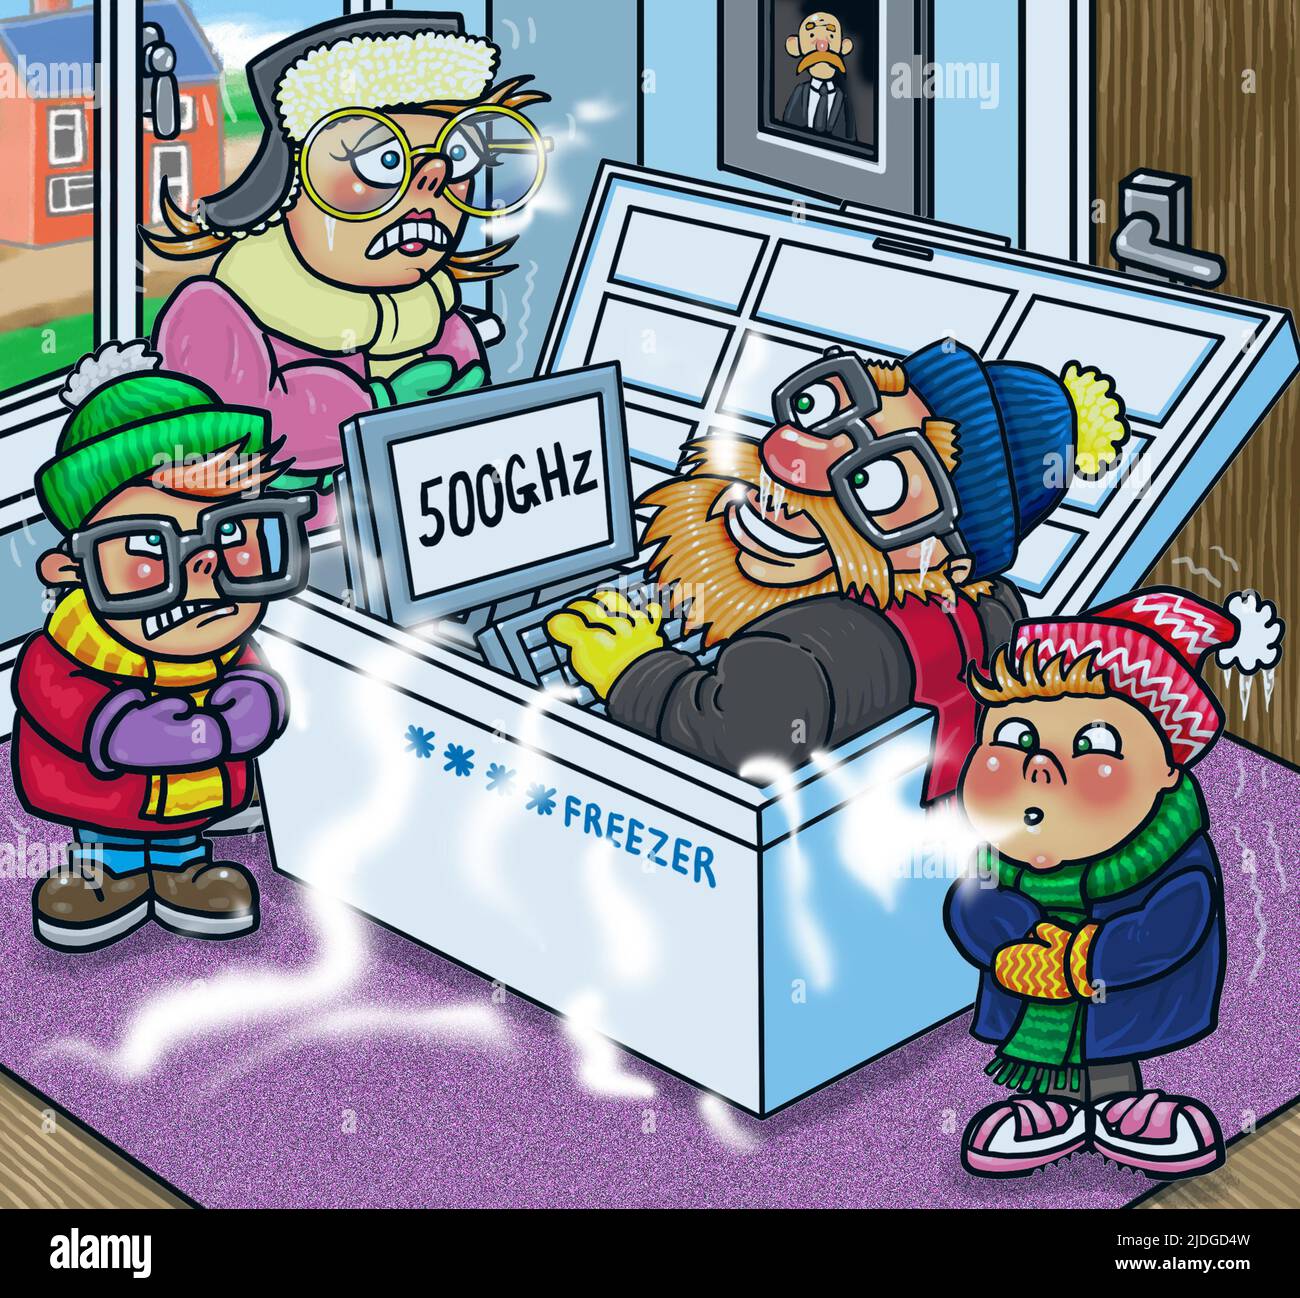 Funny cartoon art, man in freezer keeping his 500 GHz computer cool. High speed gaming/ work computers can get hot, impacting CPU/computer performance Stock Photo